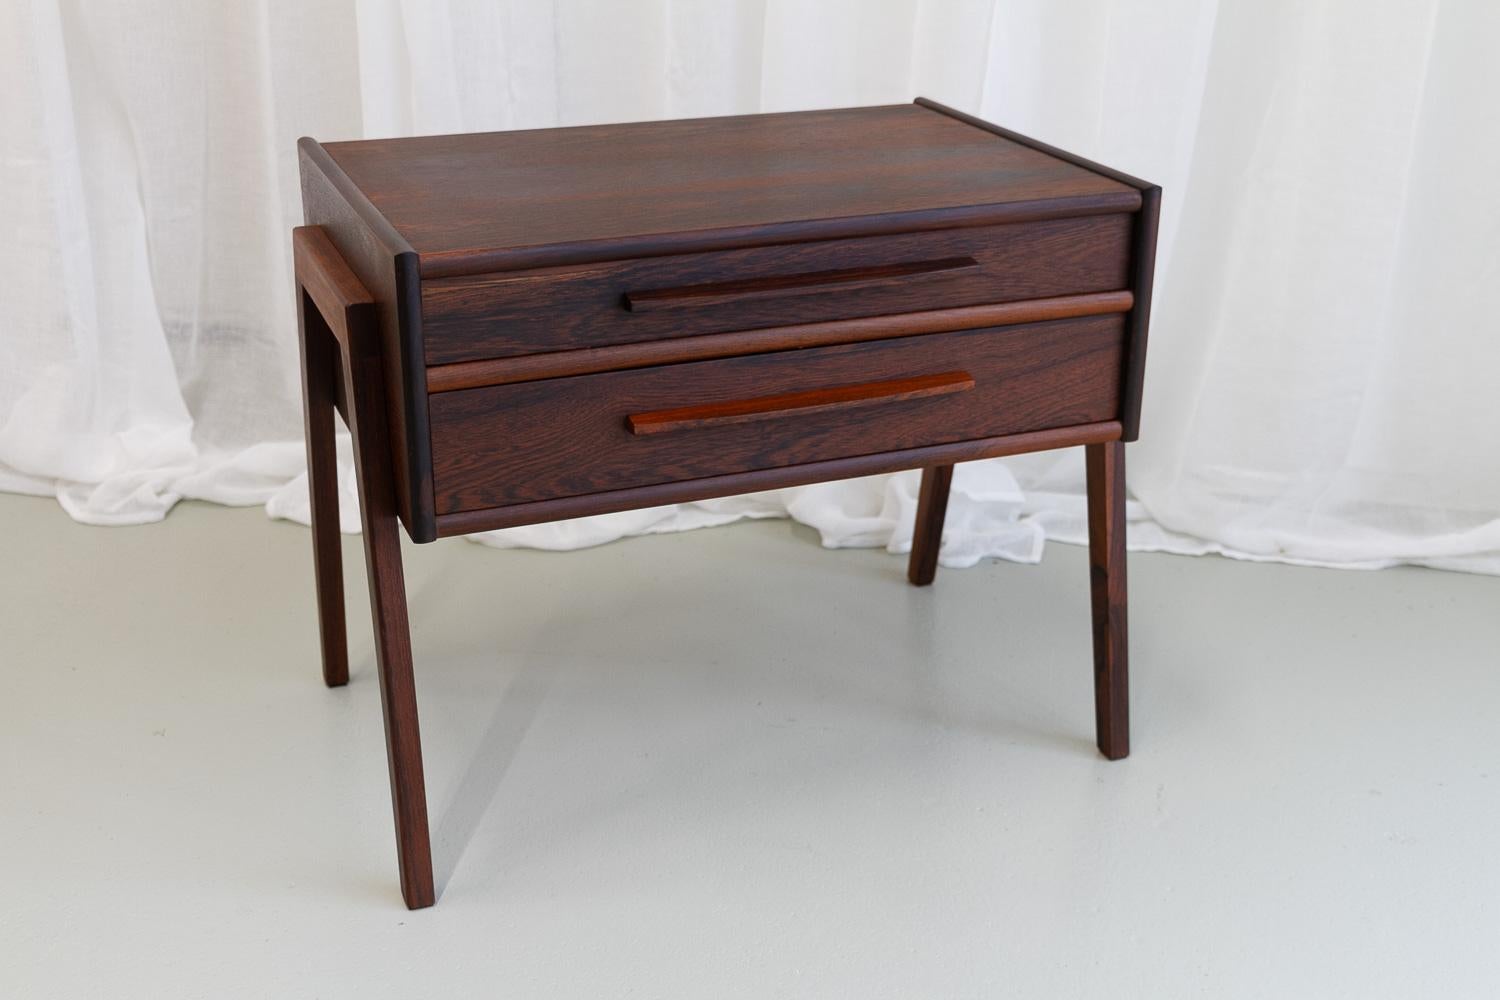 Danish Modern Rosewood Side Table, 1960s.
Stylish and versatile Scandinavian Mid-Century Modern Rosewood/Palisander table with two double sided drawers. Drawers has a light interior and top drawer features small compartments. Slanted and tapered